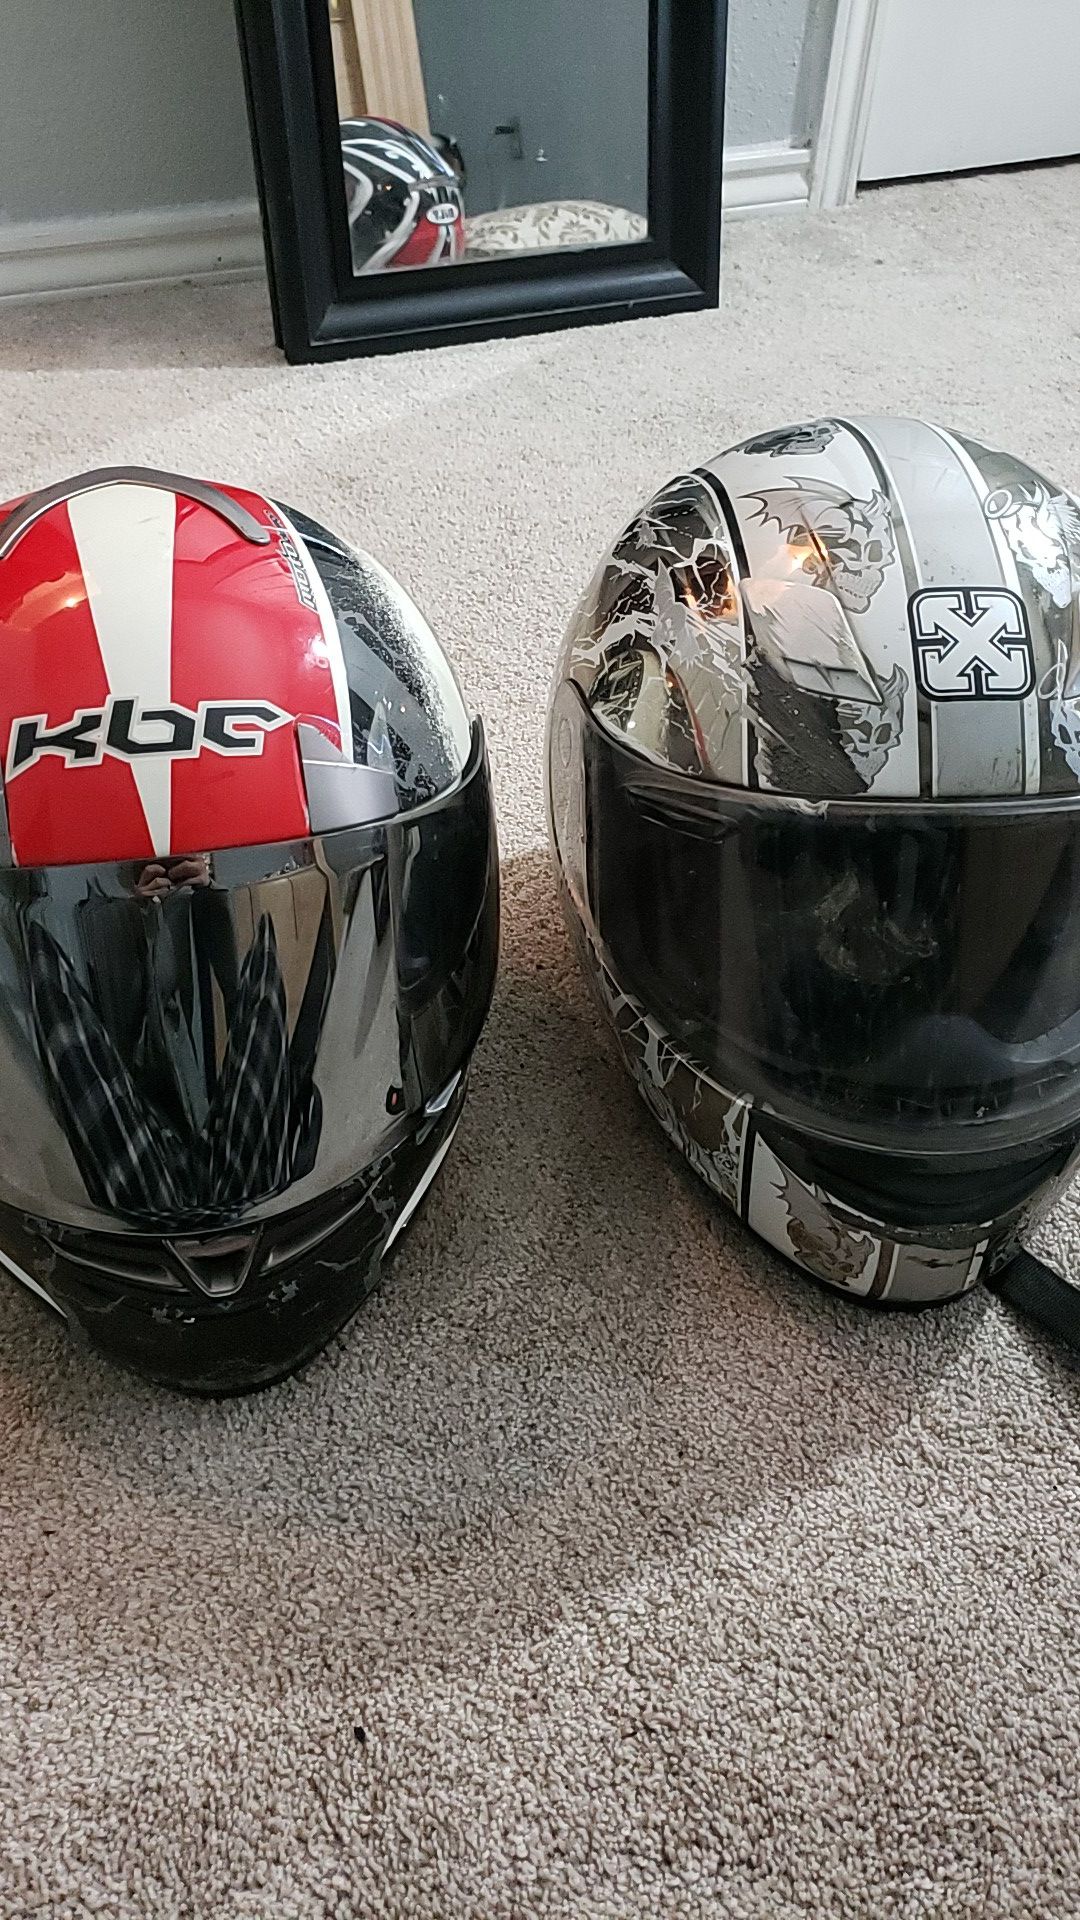 Motorcycle helmets / scratches on them